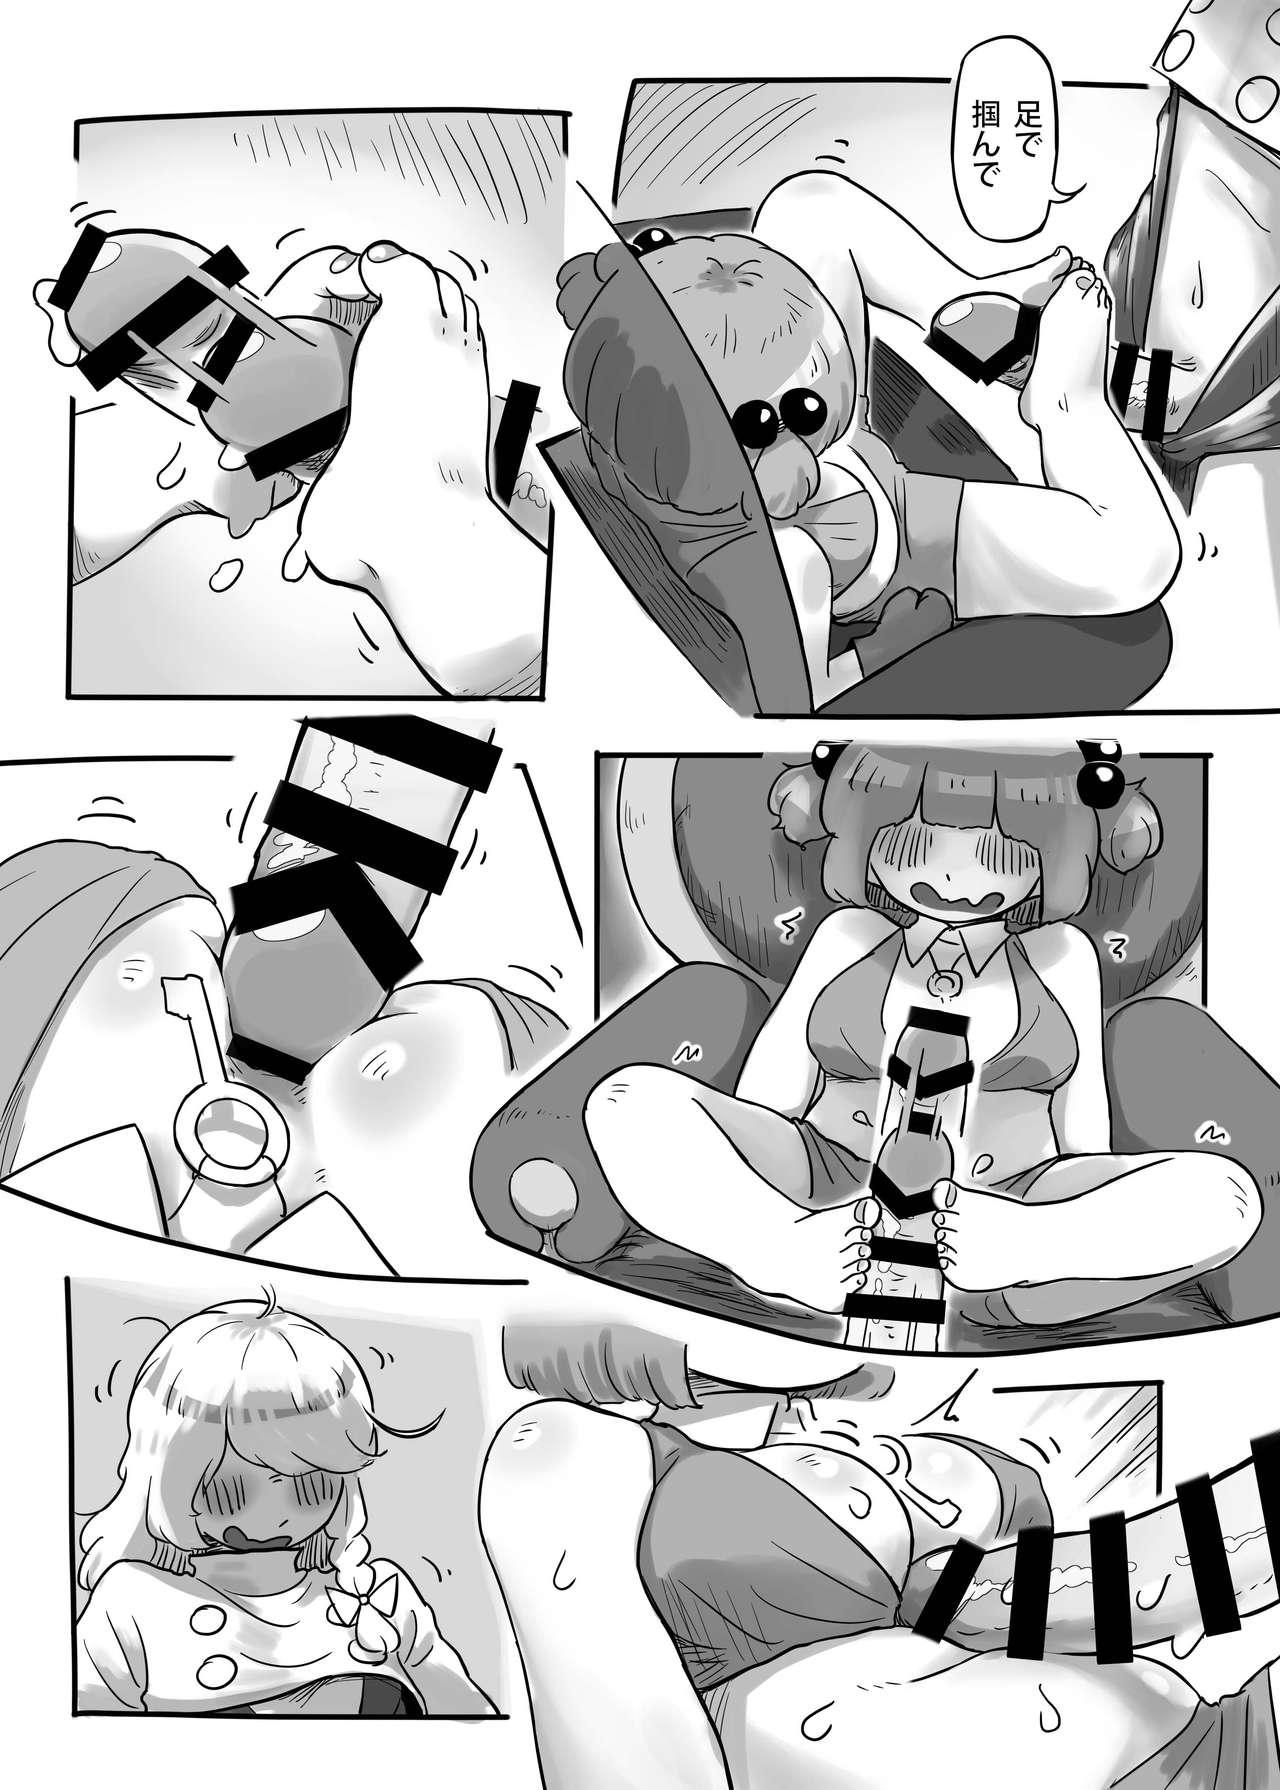 Celebrity Sex Work, Nitori-chan! - Touhou project Gros Seins - Page 12